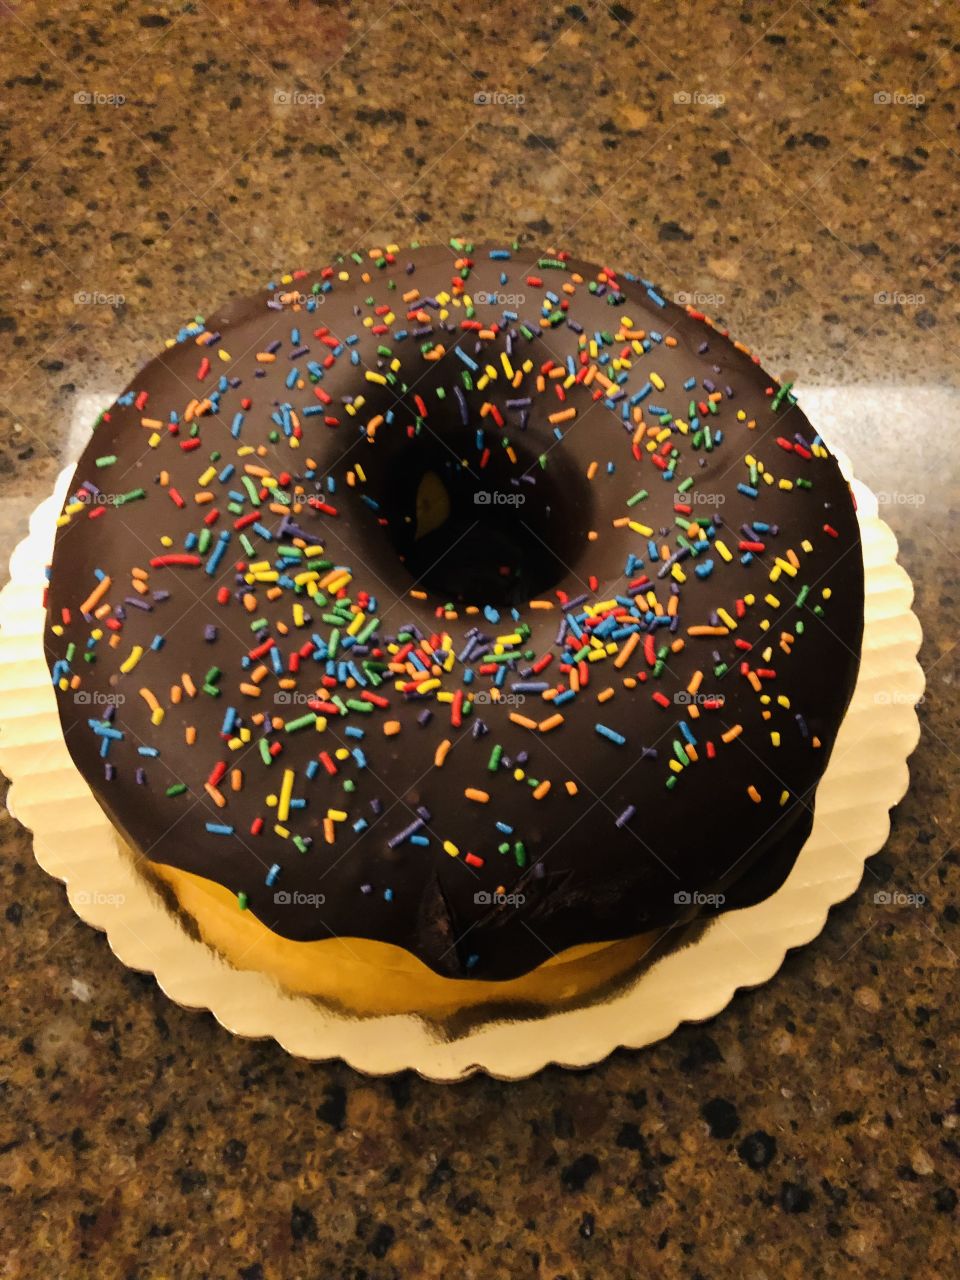 It’s a chocolate frosted with sprinkles doughnut shaped cake—yum!